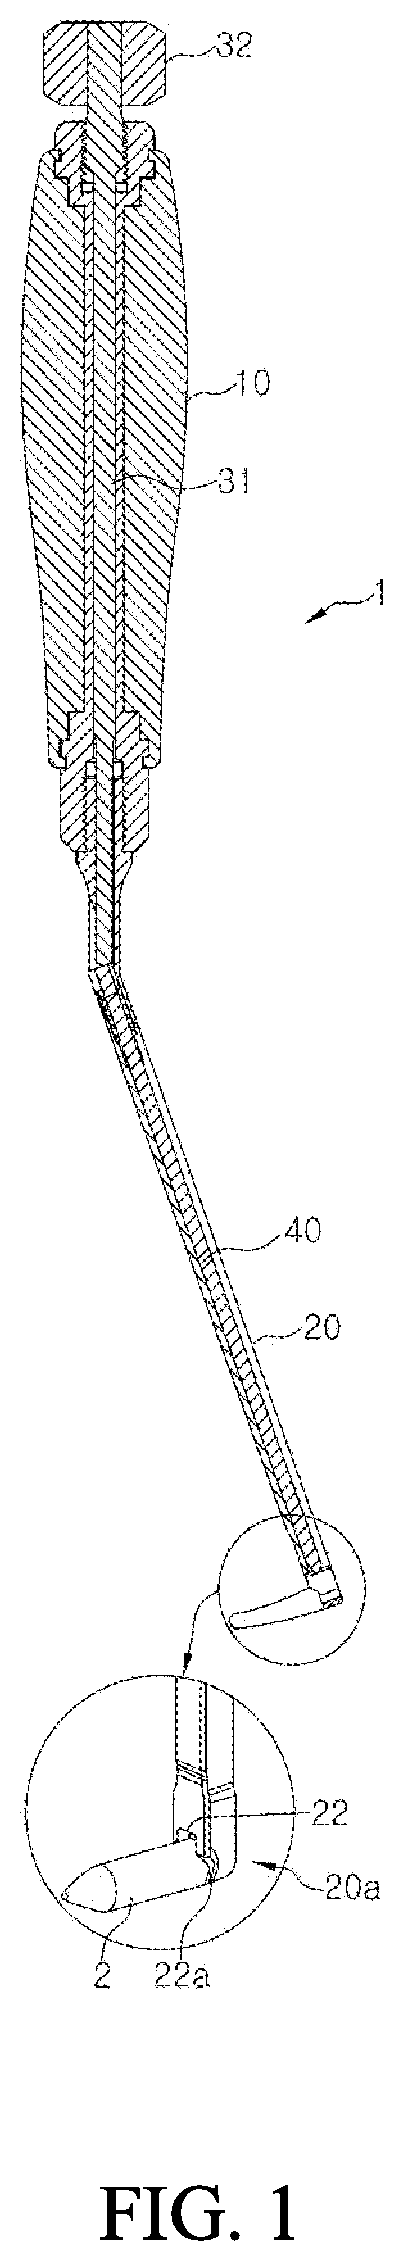 Apparatus for Spinal Surgery of Inserting Rod